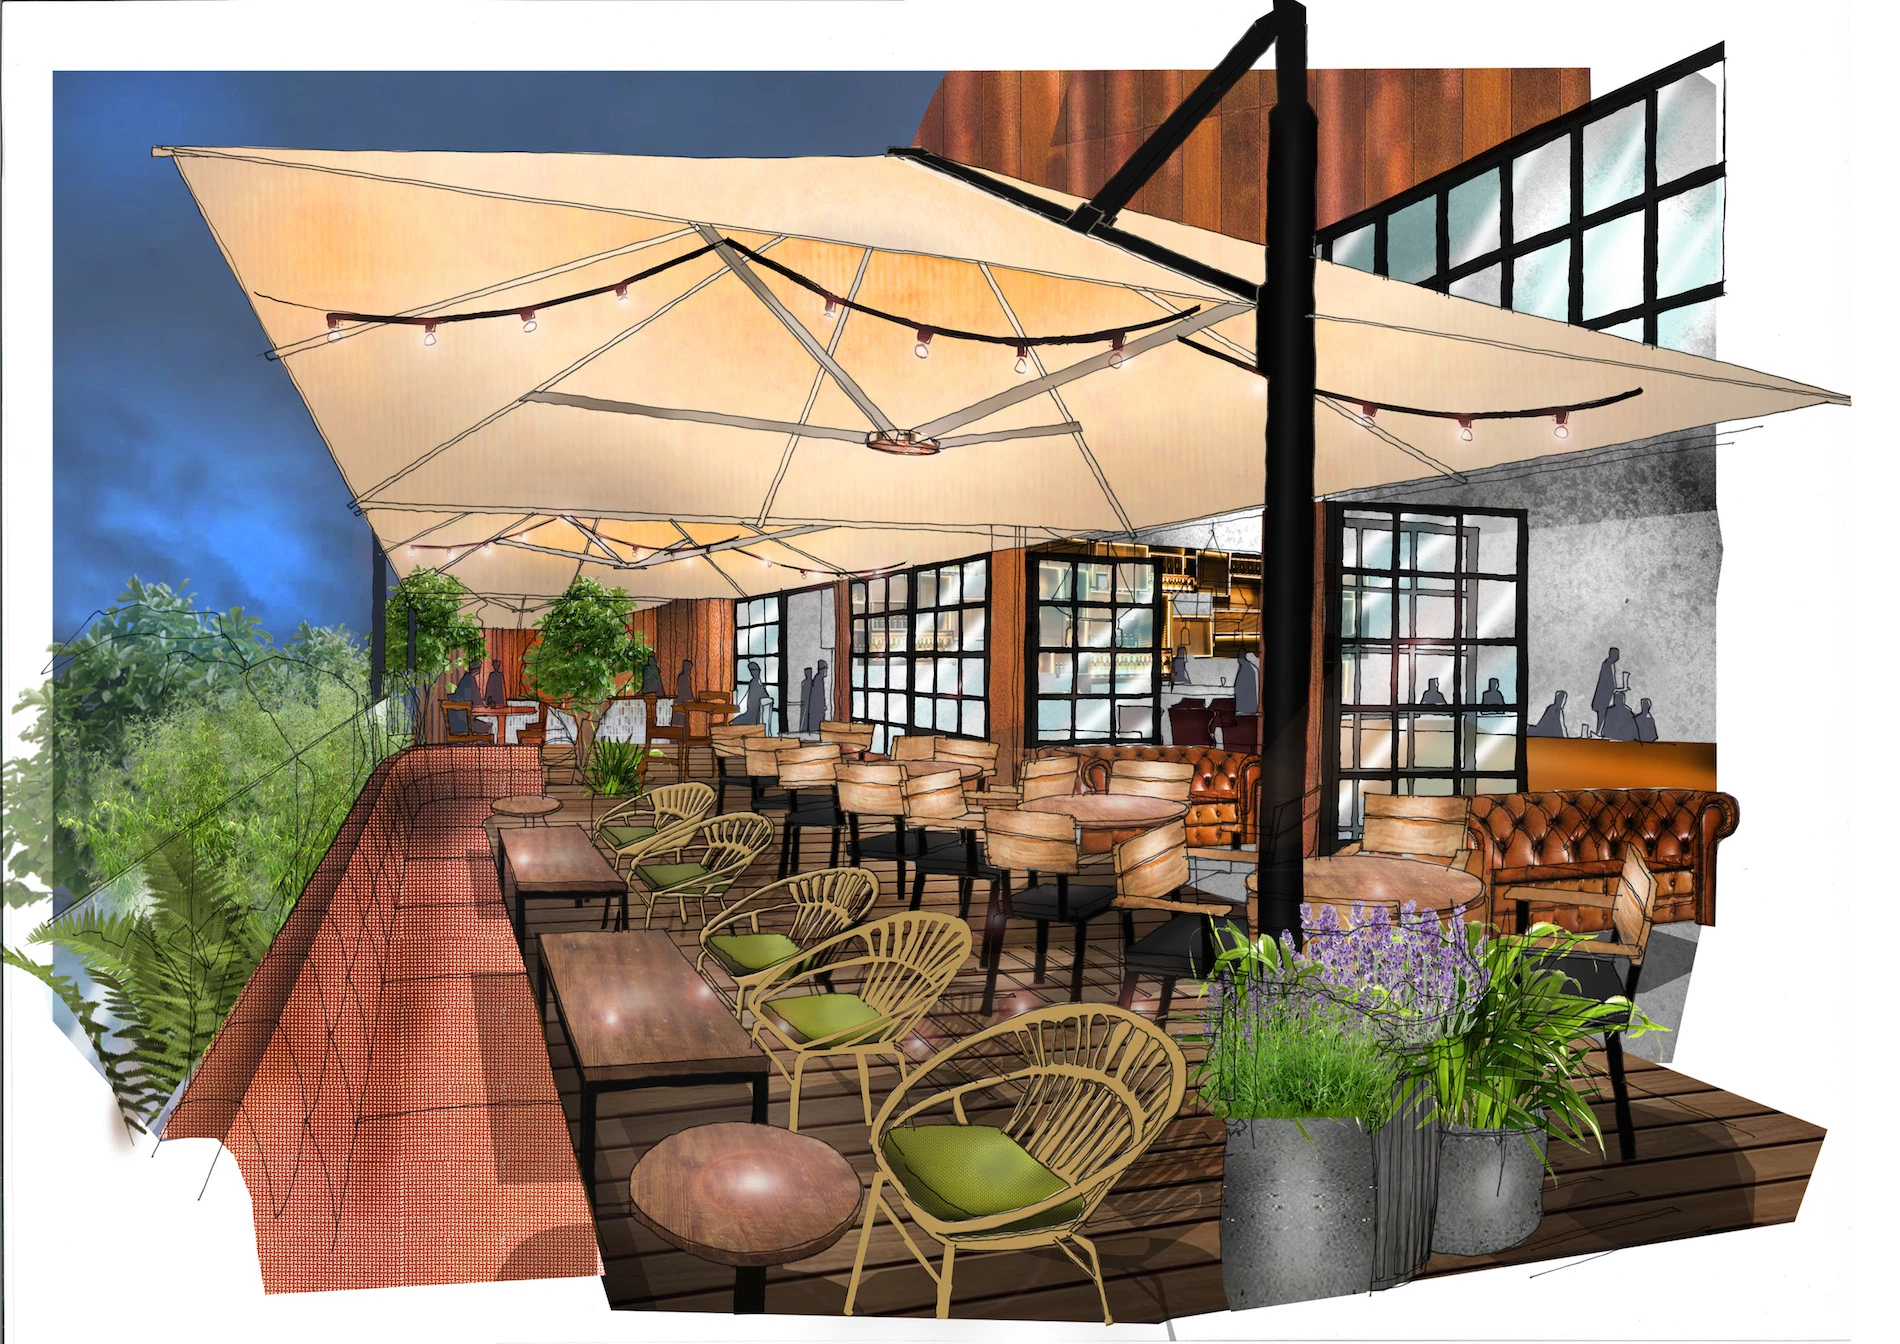 New York-inspired rooftop bar and grill in Leeds. 